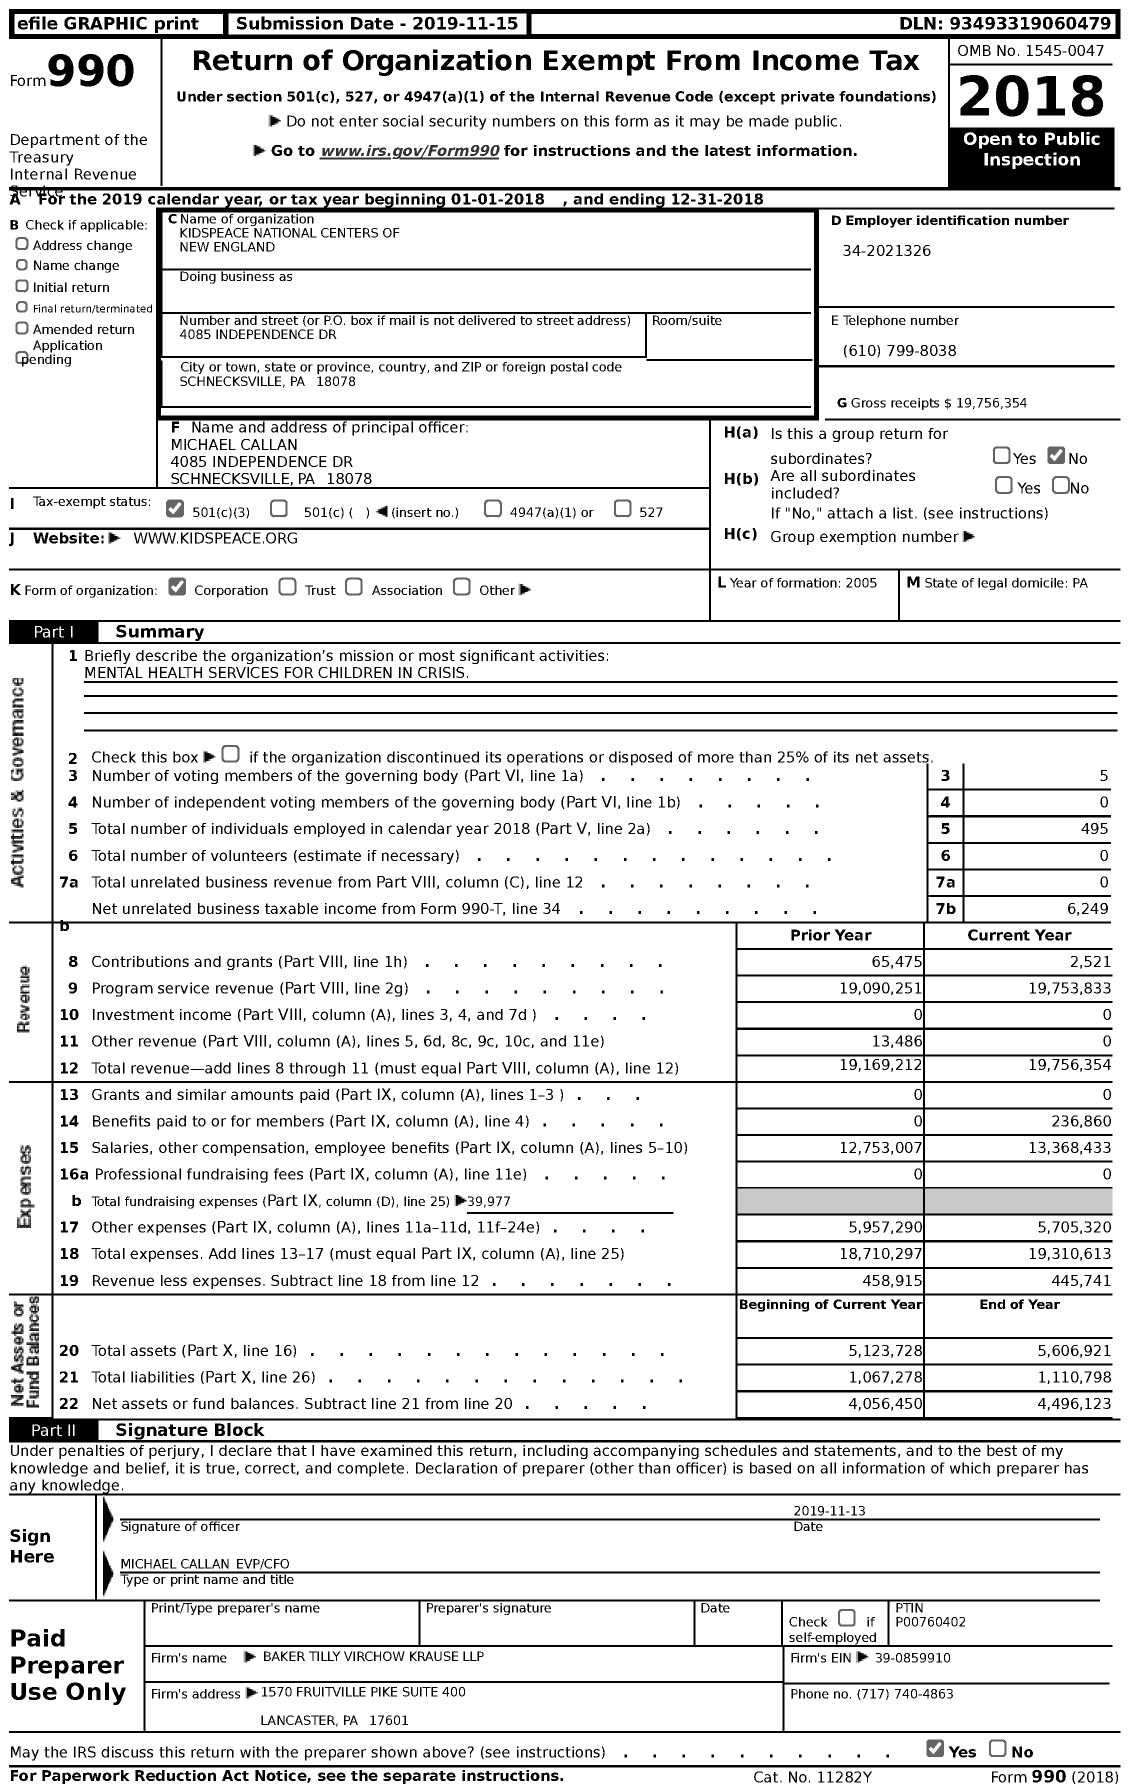 Image of first page of 2018 Form 990 for KidsPeace National Centers of New England